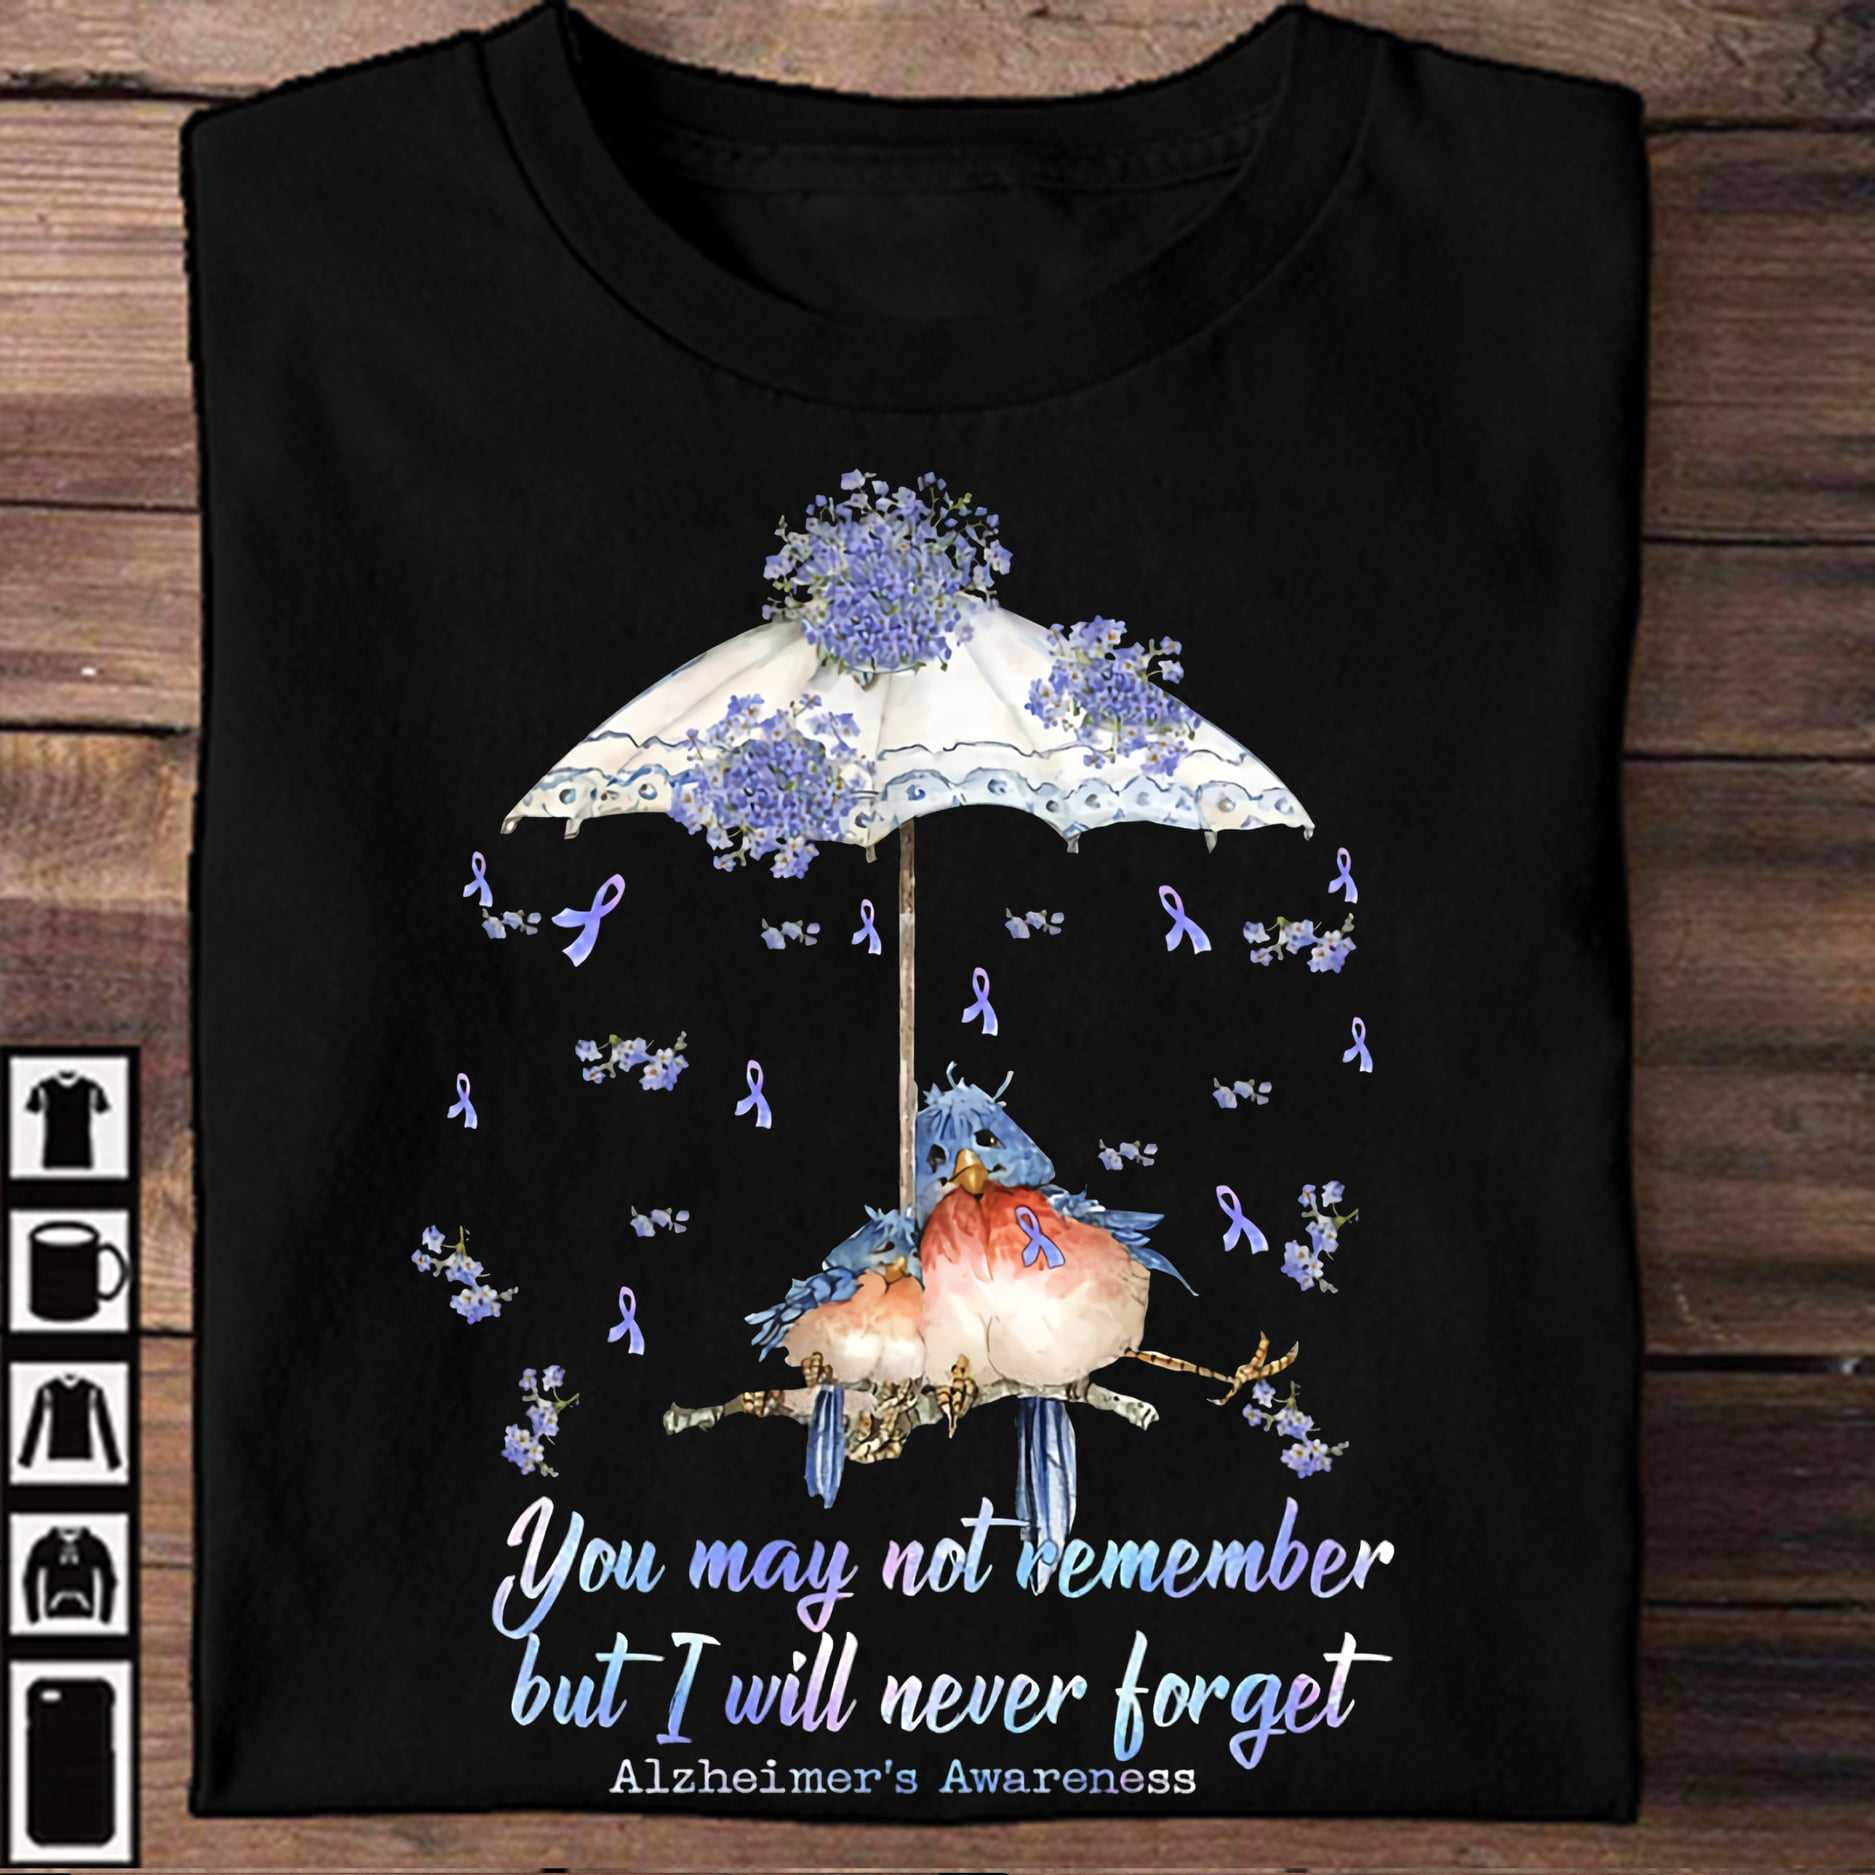 Alzheimer's hummingbird - You may not remember but i will never forget